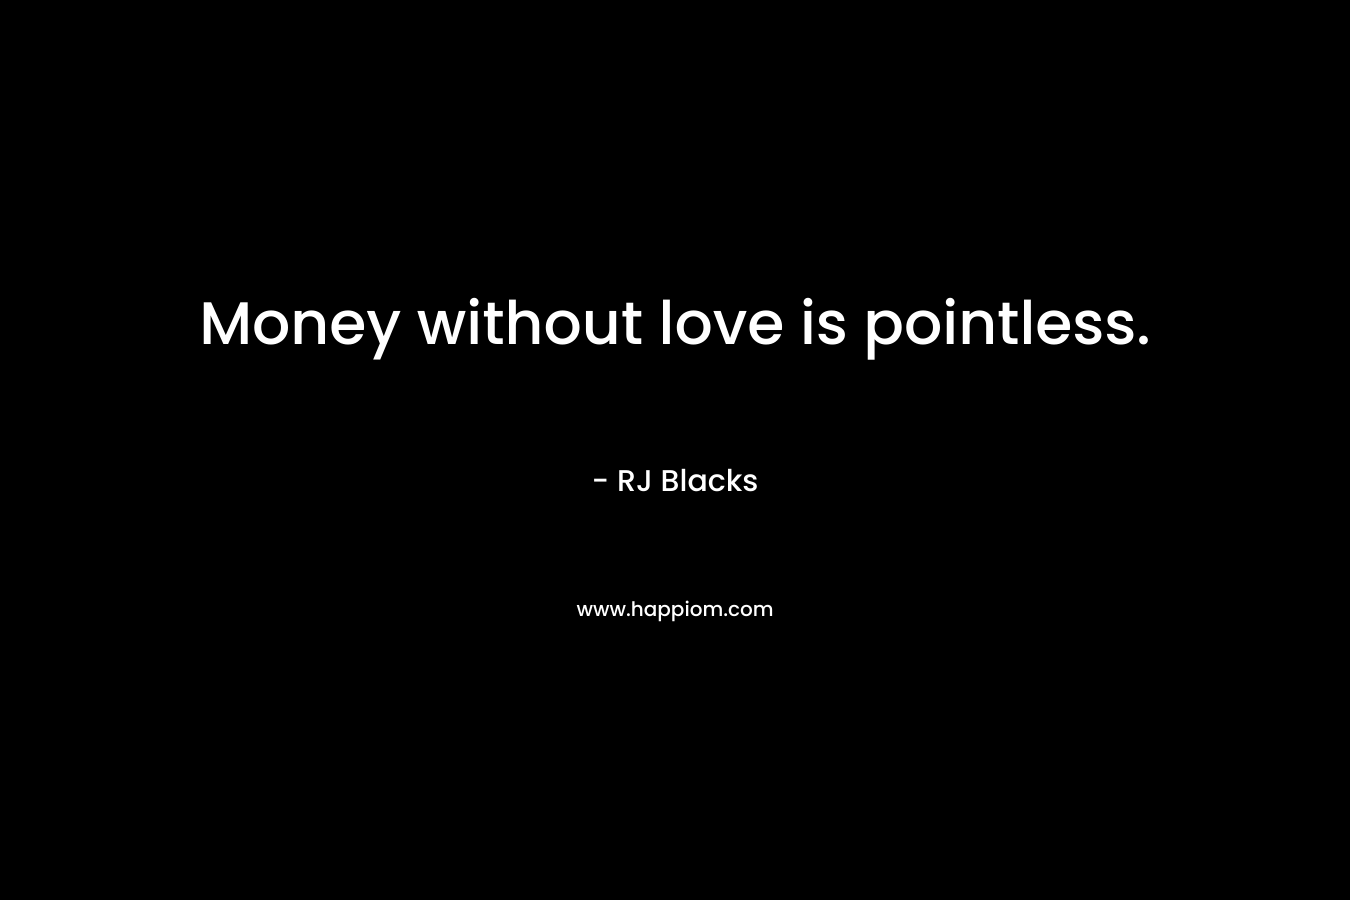 Money without love is pointless.